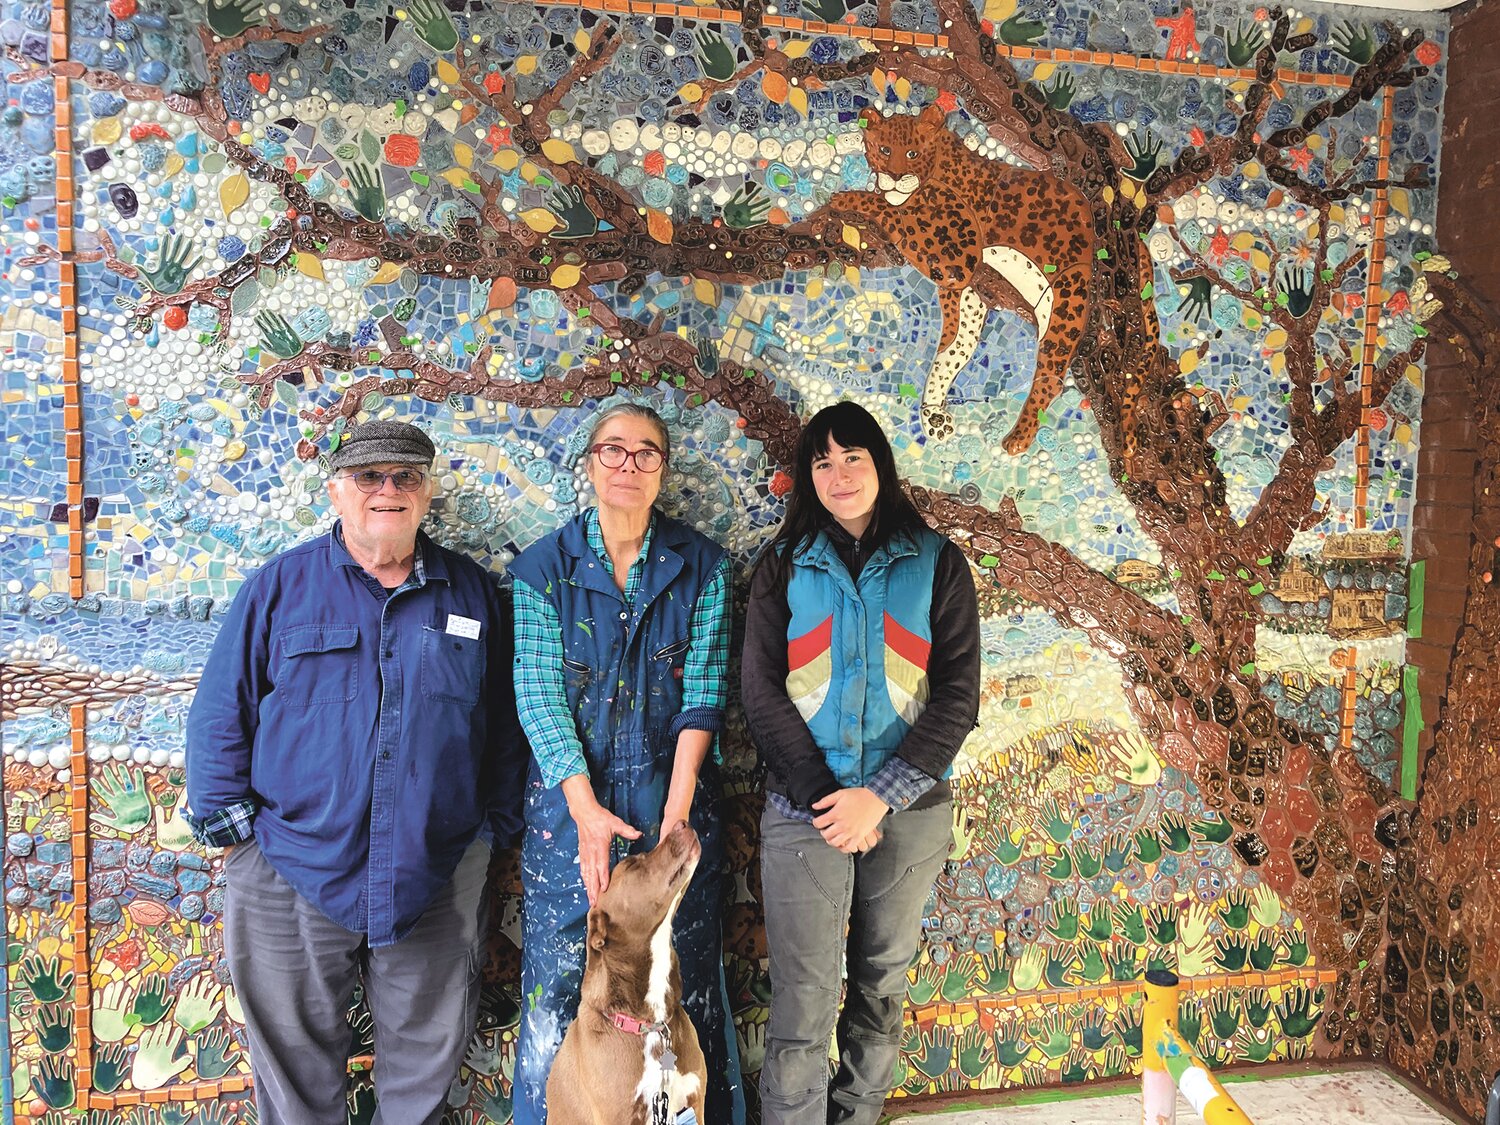 THE FINISHING TOUCHES: Peter Geisser, Mika Seeger and Jade Donaldson (from left to right) stand in front of the mural at Lippitt as it nears completion, along with Seeger’s daughter’s dog Bernie. Bernie, according to Seeger, has become a mascot for the project amongst the Lippitt students.